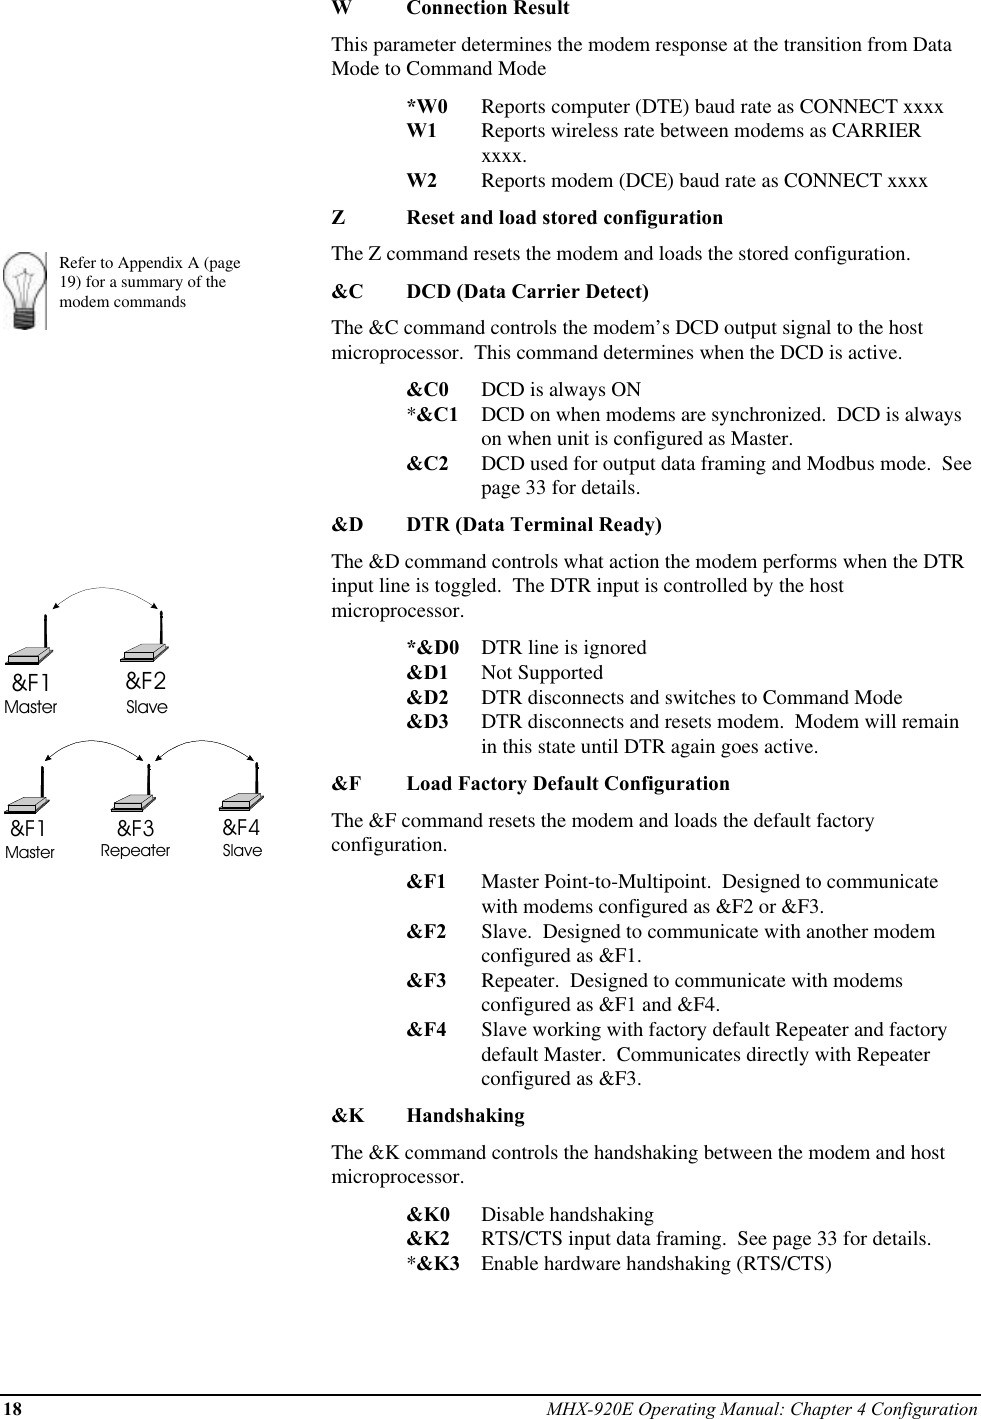 18 MHX-920E Operating Manual: Chapter 4 ConfigurationRefer to Appendix A (page19) for a summary of themodem commands&amp;F1 &amp;F2Master Slave&amp;F1 &amp;F4&amp;F3Master Repeater SlaveWConnection ResultThis parameter determines the modem response at the transition from DataMode to Command Mode*W0 Reports computer (DTE) baud rate as CONNECT xxxxW1 Reports wireless rate between modems as CARRIER xxxx.W2 Reports modem (DCE) baud rate as CONNECT xxxxZReset and load stored configurationThe Z command resets the modem and loads the stored configuration.&amp;C DCD (Data Carrier Detect)The &amp;C command controls the modem’s DCD output signal to the hostmicroprocessor.  This command determines when the DCD is active.&amp;C0 DCD is always ON*&amp;C1 DCD on when modems are synchronized.  DCD is alwayson when unit is configured as Master.&amp;C2 DCD used for output data framing and Modbus mode.  Seepage 33 for details.&amp;D DTR (Data Terminal Ready)The &amp;D command controls what action the modem performs when the DTRinput line is toggled.  The DTR input is controlled by the hostmicroprocessor.*&amp;D0 DTR line is ignored&amp;D1 Not Supported&amp;D2 DTR disconnects and switches to Command Mode&amp;D3 DTR disconnects and resets modem.  Modem will remainin this state until DTR again goes active.&amp;F Load Factory Default ConfigurationThe &amp;F command resets the modem and loads the default factoryconfiguration.&amp;F1 Master Point-to-Multipoint.  Designed to communicatewith modems configured as &amp;F2 or &amp;F3.&amp;F2 Slave.  Designed to communicate with another modemconfigured as &amp;F1.&amp;F3 Repeater.  Designed to communicate with modemsconfigured as &amp;F1 and &amp;F4.&amp;F4 Slave working with factory default Repeater and factorydefault Master.  Communicates directly with Repeaterconfigured as &amp;F3.&amp;K HandshakingThe &amp;K command controls the handshaking between the modem and hostmicroprocessor.&amp;K0 Disable handshaking&amp;K2 RTS/CTS input data framing.  See page 33 for details.*&amp;K3 Enable hardware handshaking (RTS/CTS)